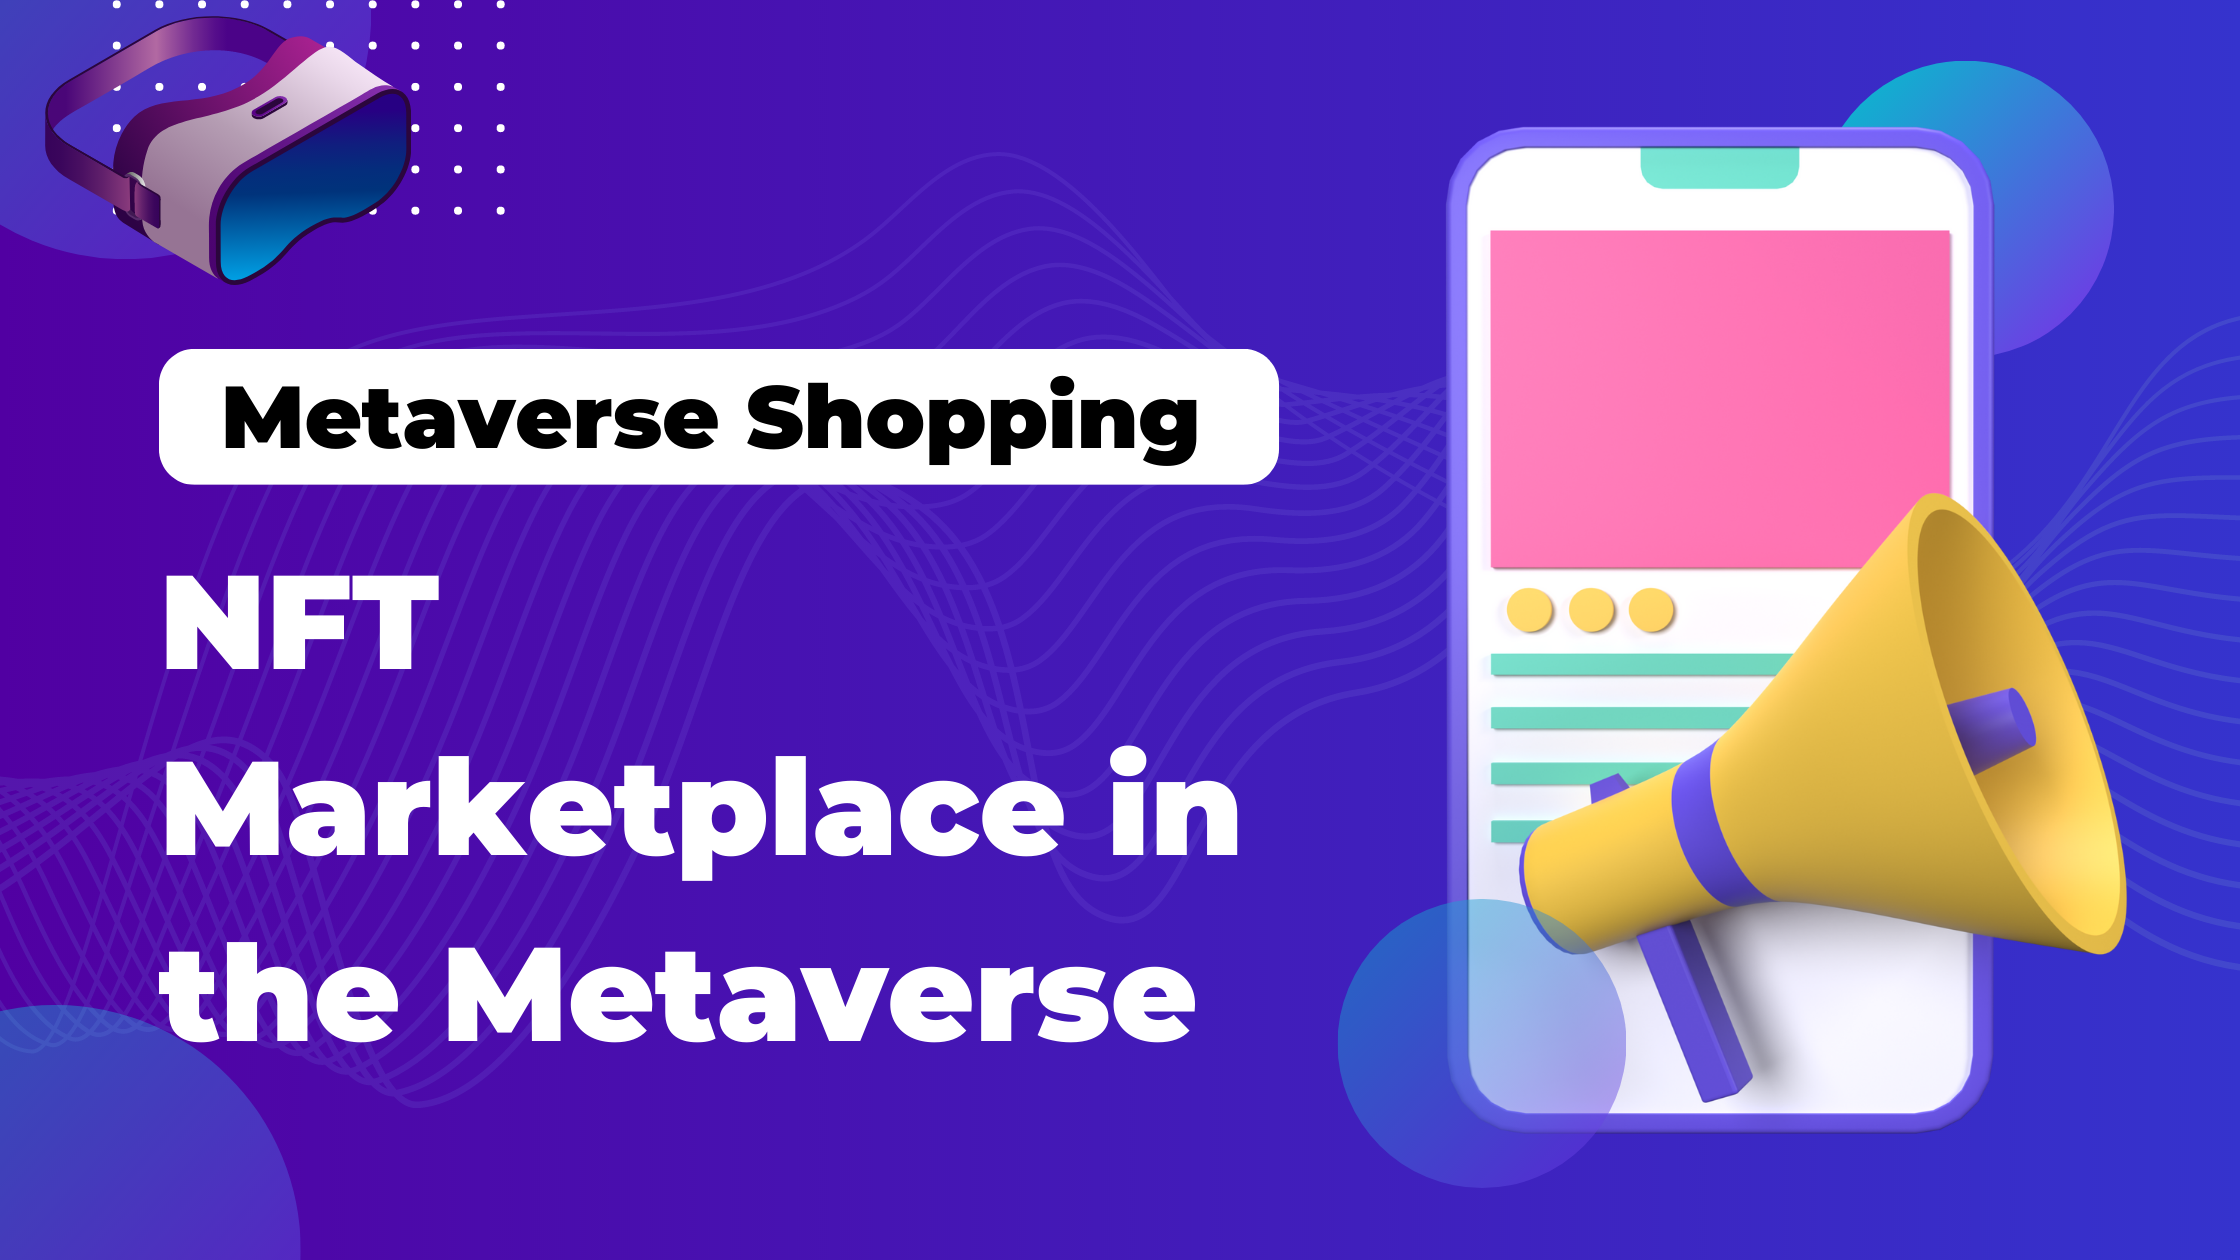 NFT Marketplace in the Metaverse